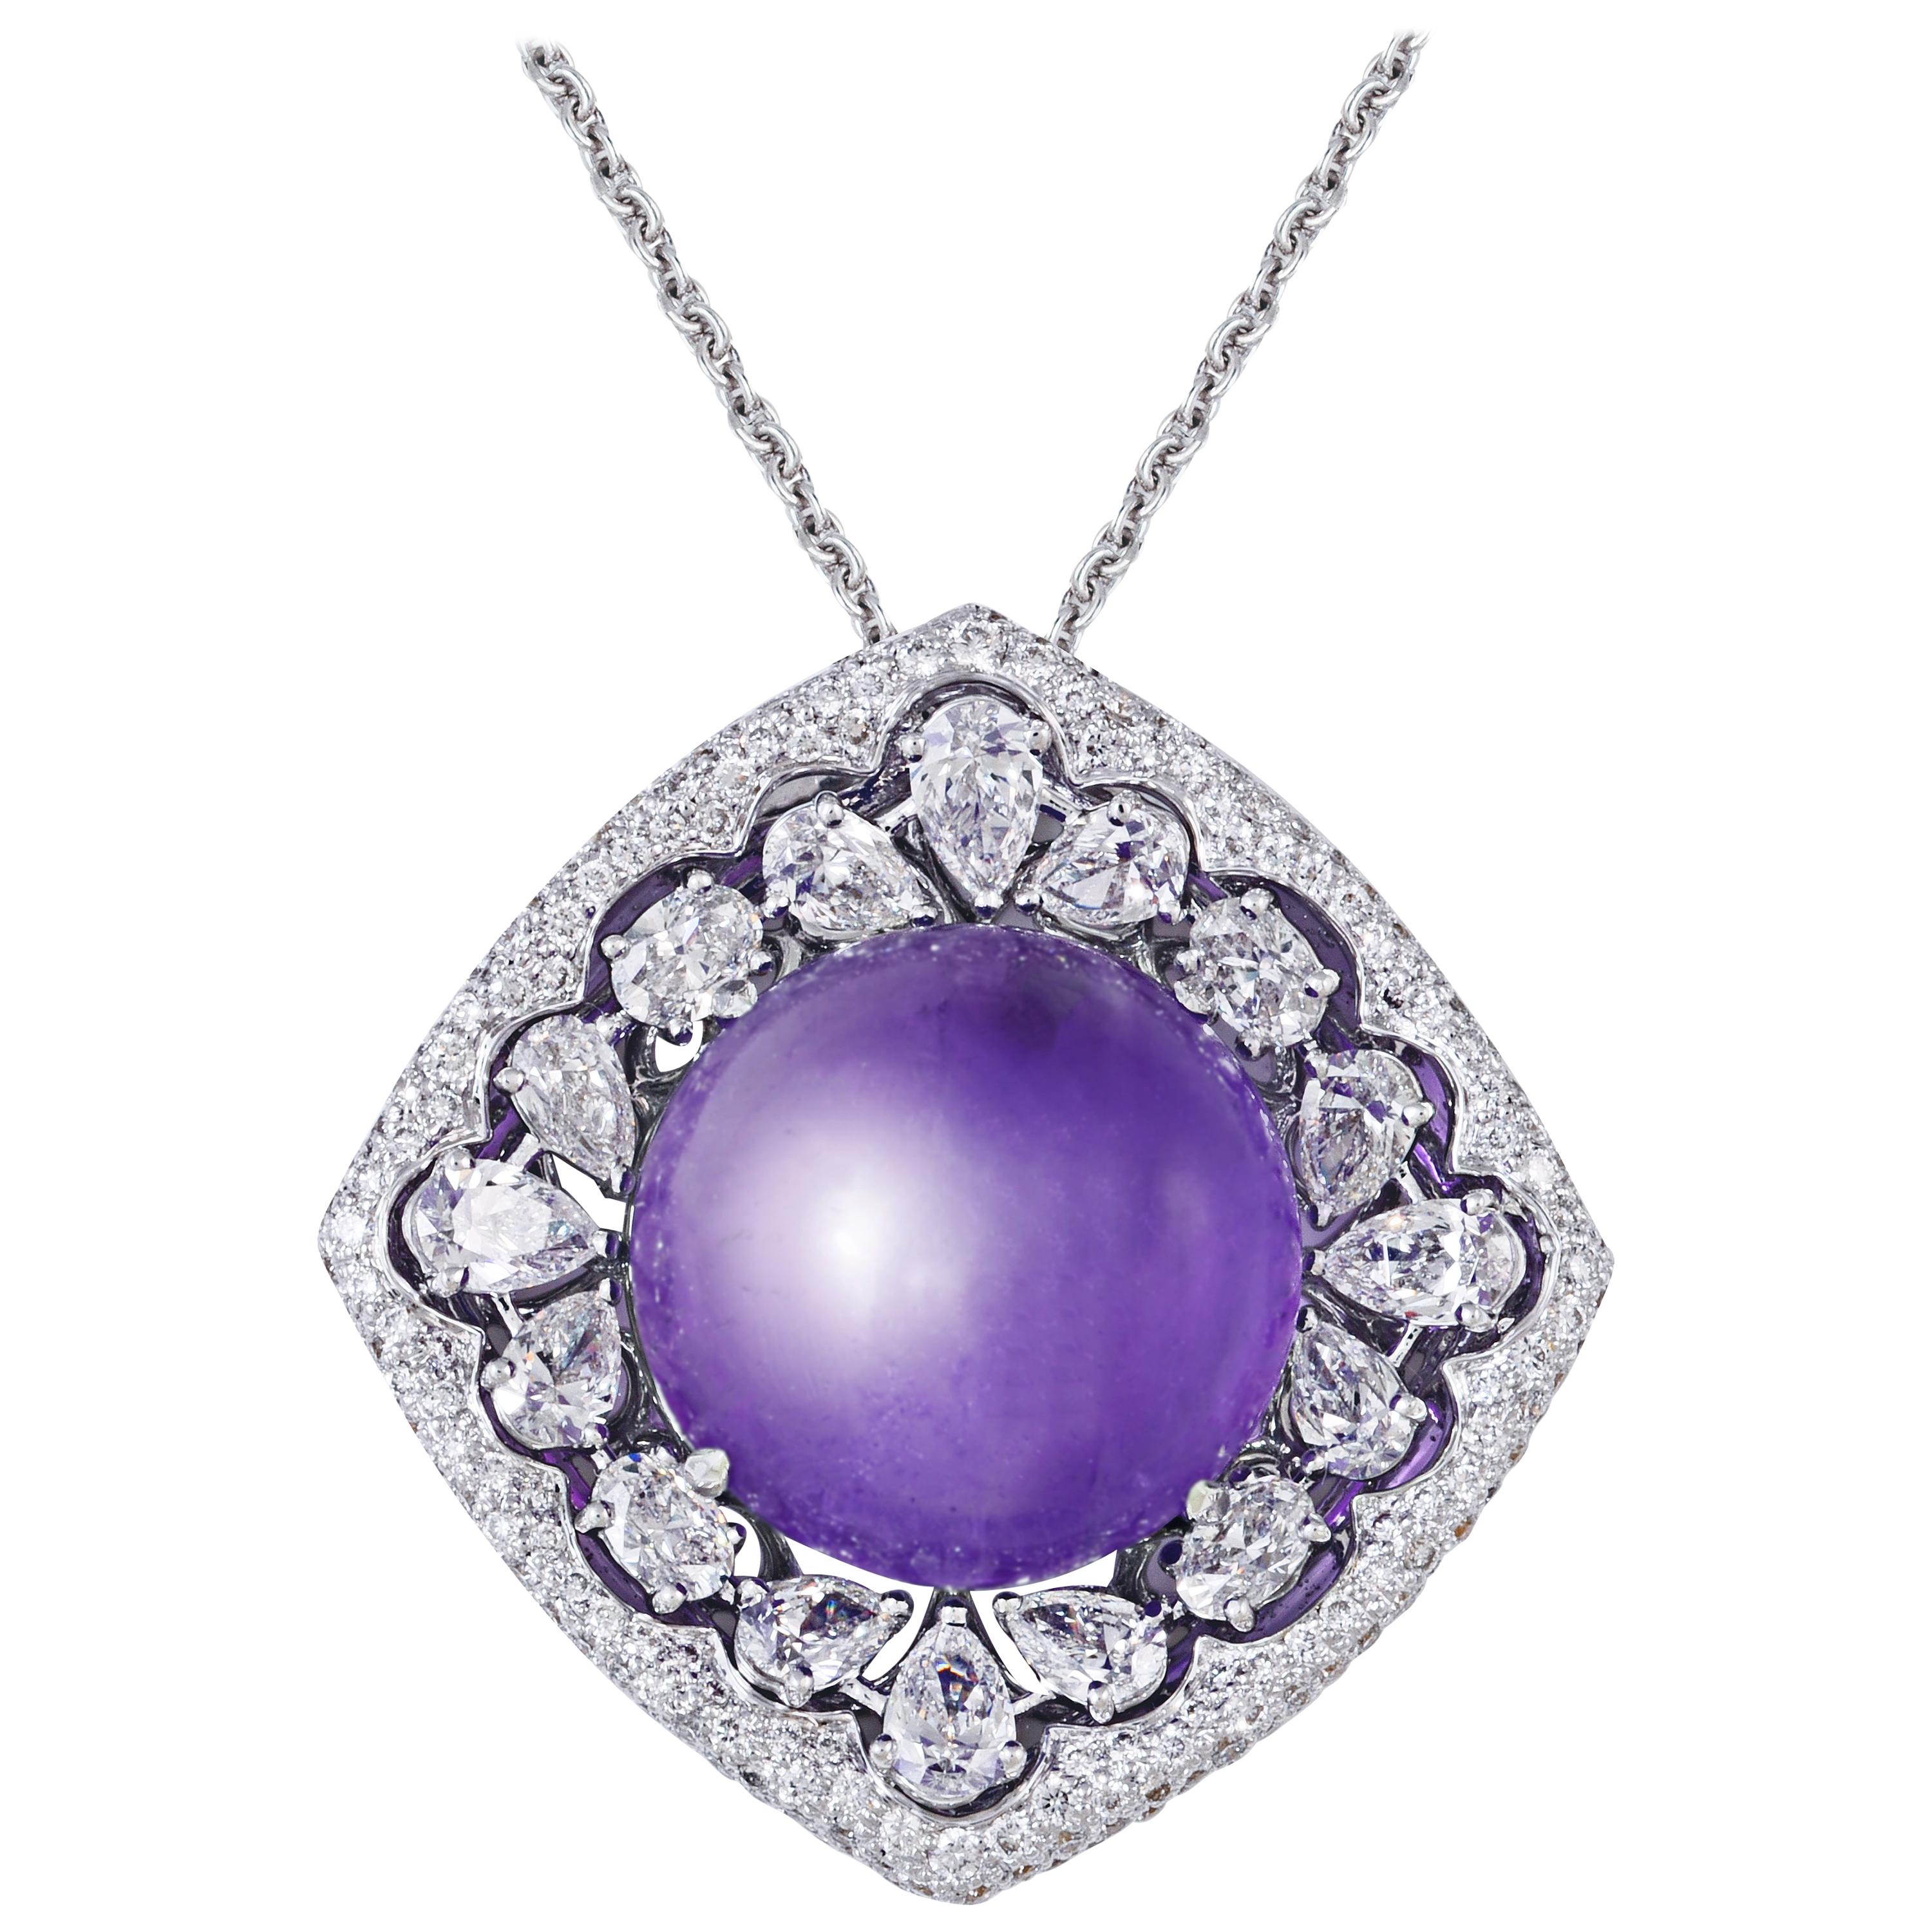 14.12 carats Amethyst cabochon Pendant with Rosecut & Round diamonds with Chain 